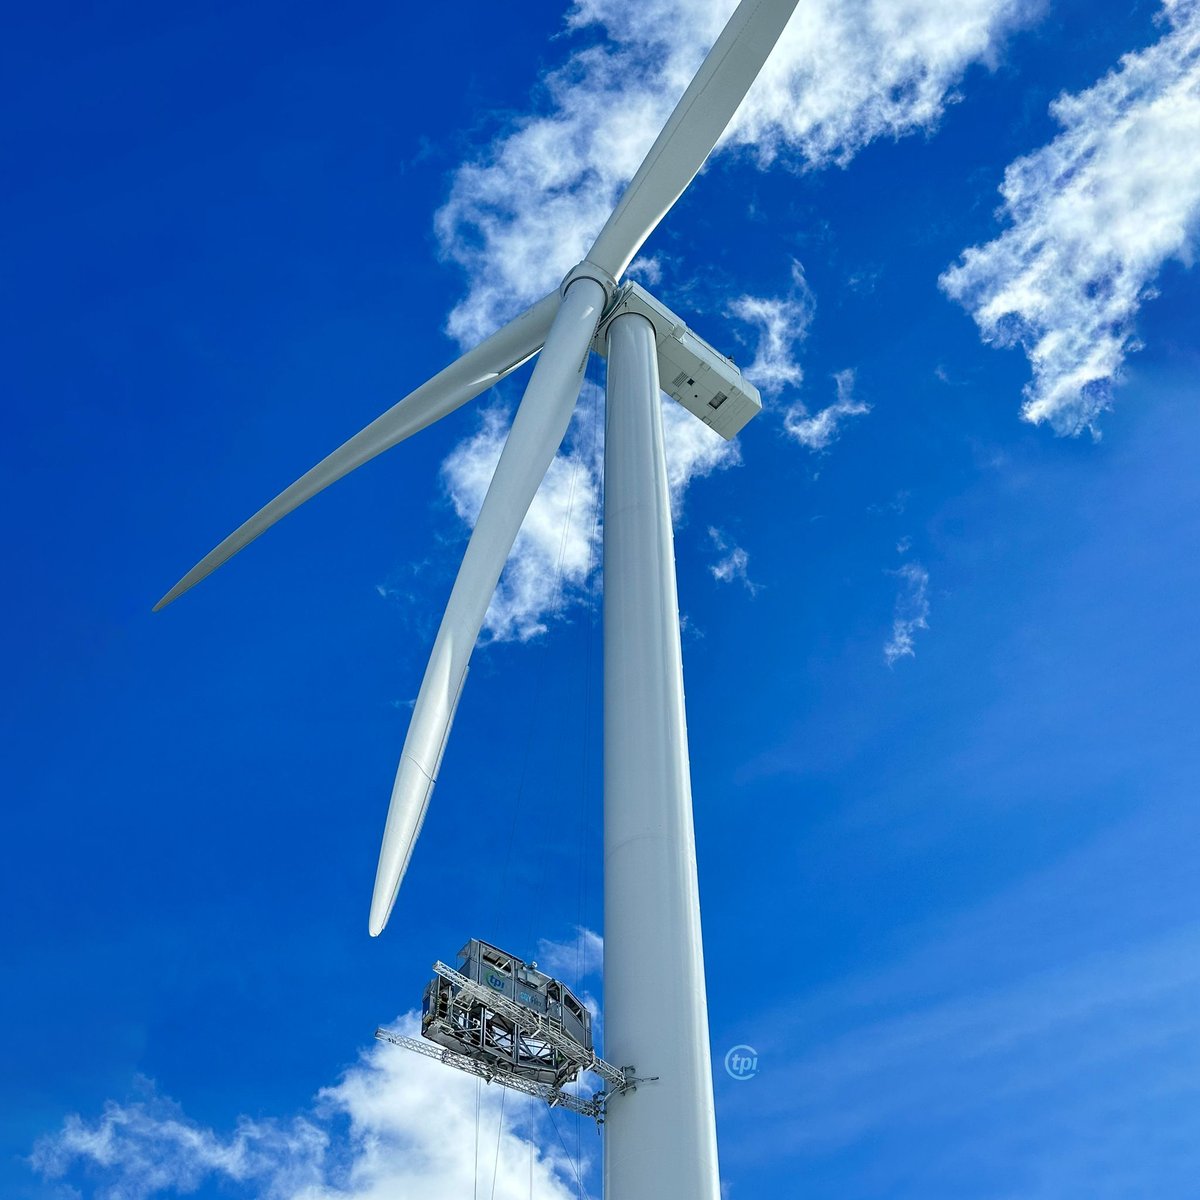 TPI, with vast #WindBladeManufacturing expertise, provides a full range of #FieldServices to ensure optimal #WindTurbine performance, including #engineering, preventative maintenance, inspection, analysis, repairs, & enhancements. #mytpi #windpower #windenergy #cleanenergy